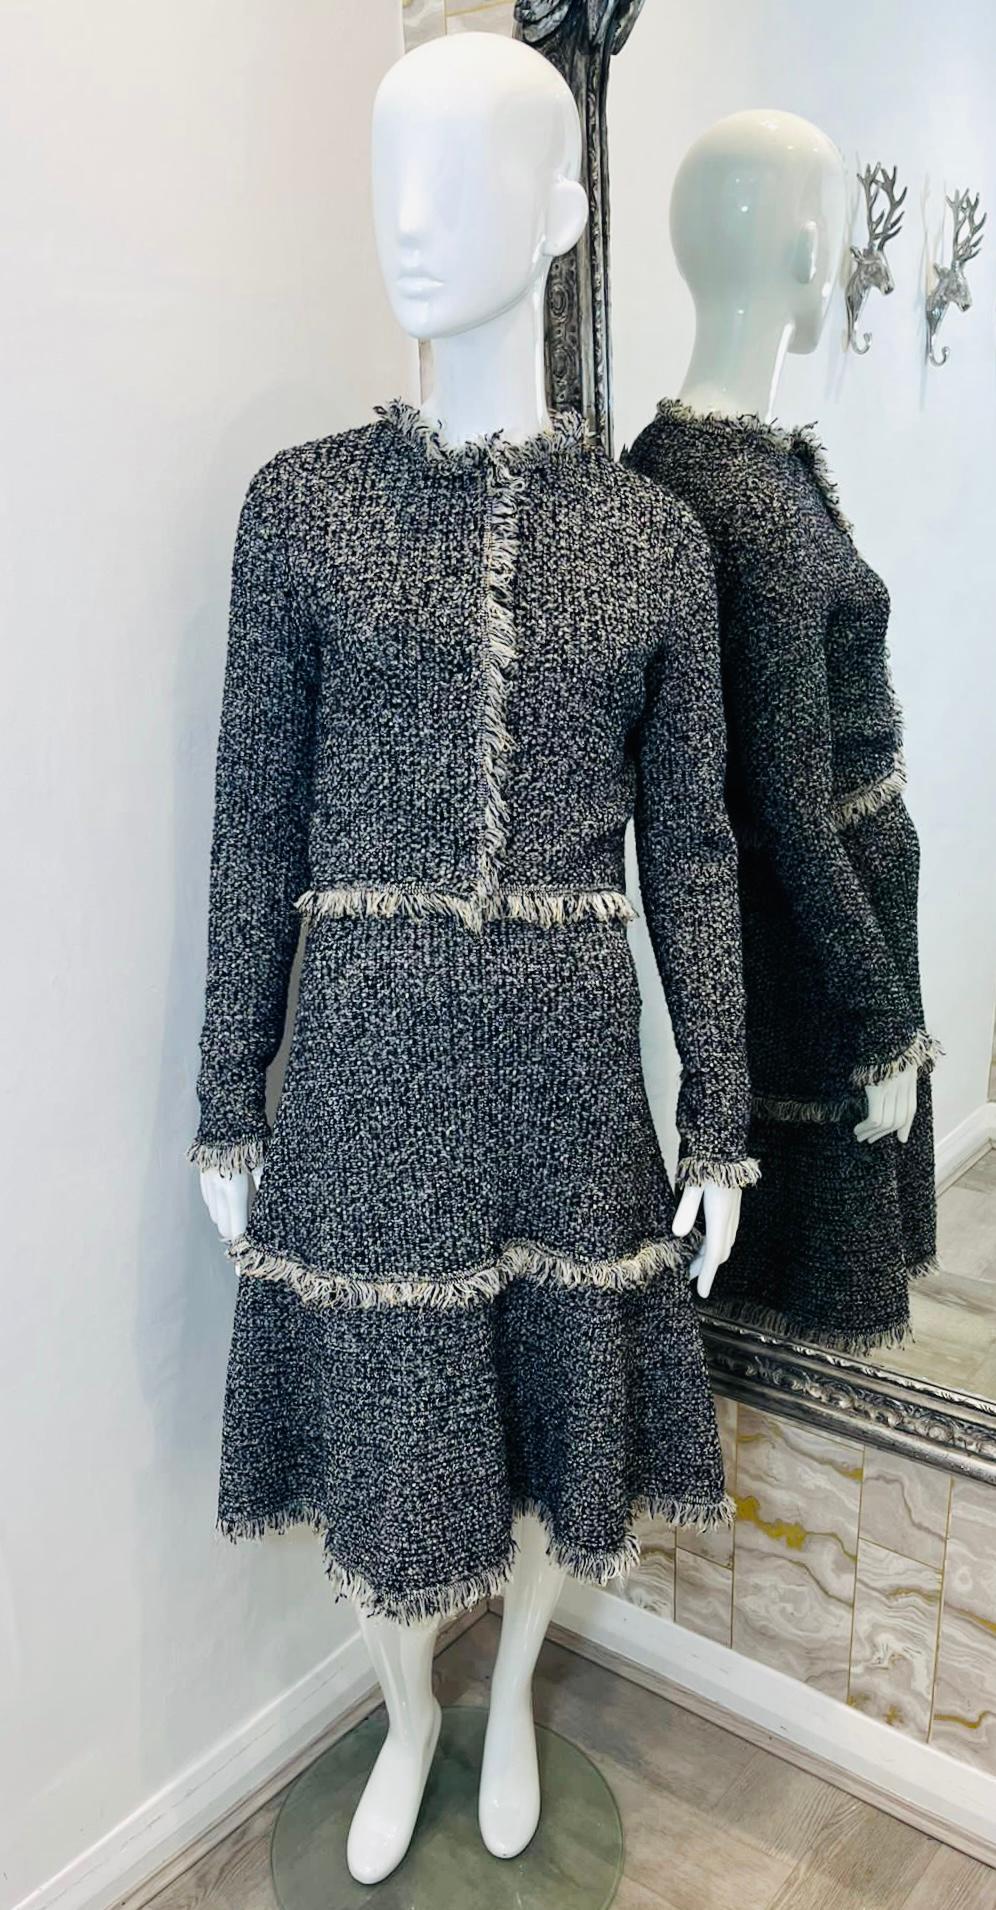 Oscar De La Renta Wool Dress & Jacket Two-Piece Set

Black and white texture patterned set consisting of A-Line dress and cropped jacket detailed with light grey fringe trims.

Sleeveless dress featuring crew neckline, knee length and zip fastening